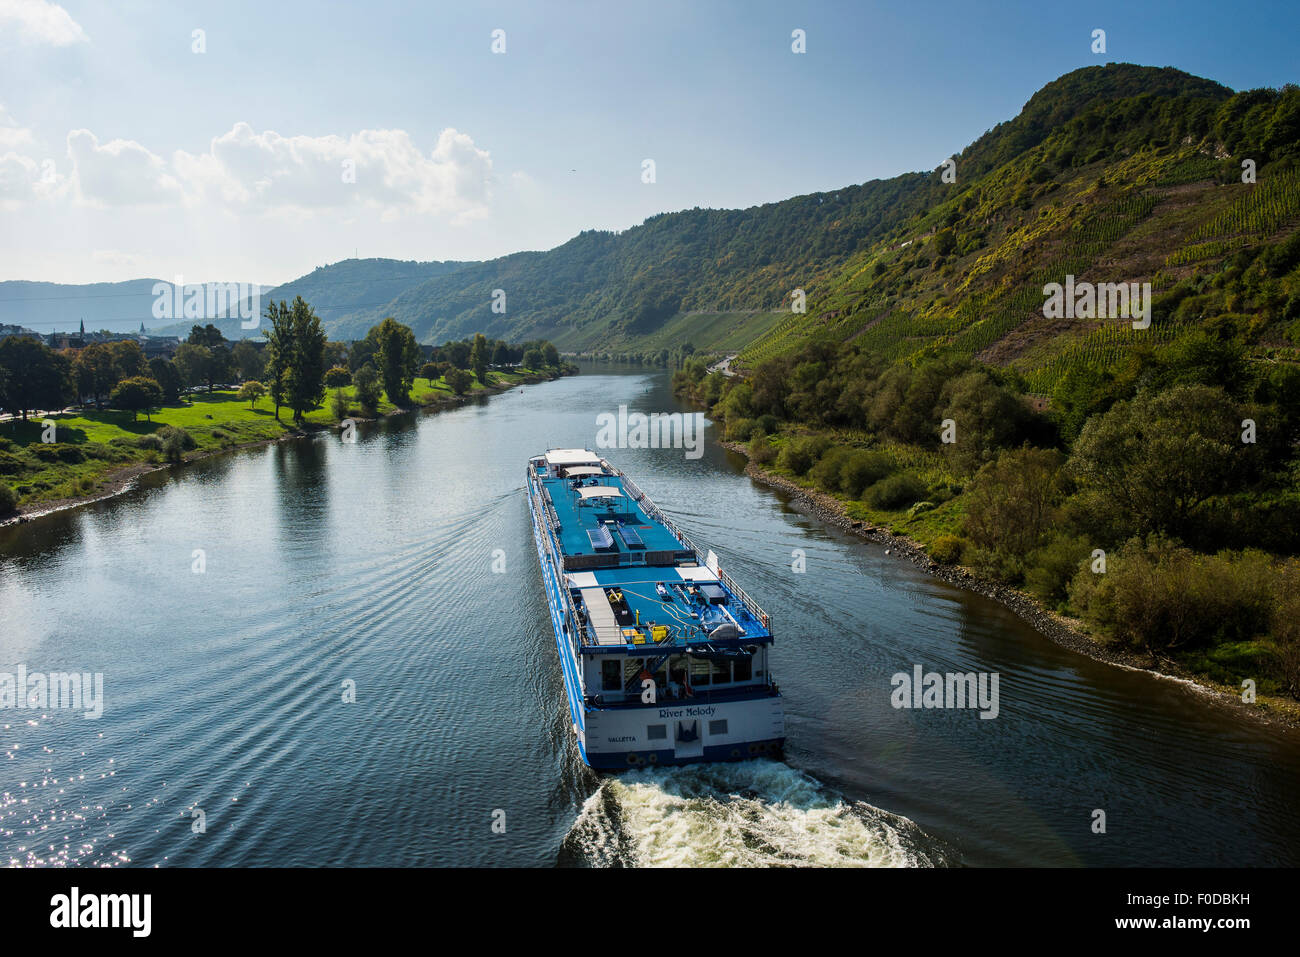 Cruise ship on the Moselle passing Beilstein, Moselle Valley, Rhineland-Palatinate, Germany Stock Photo